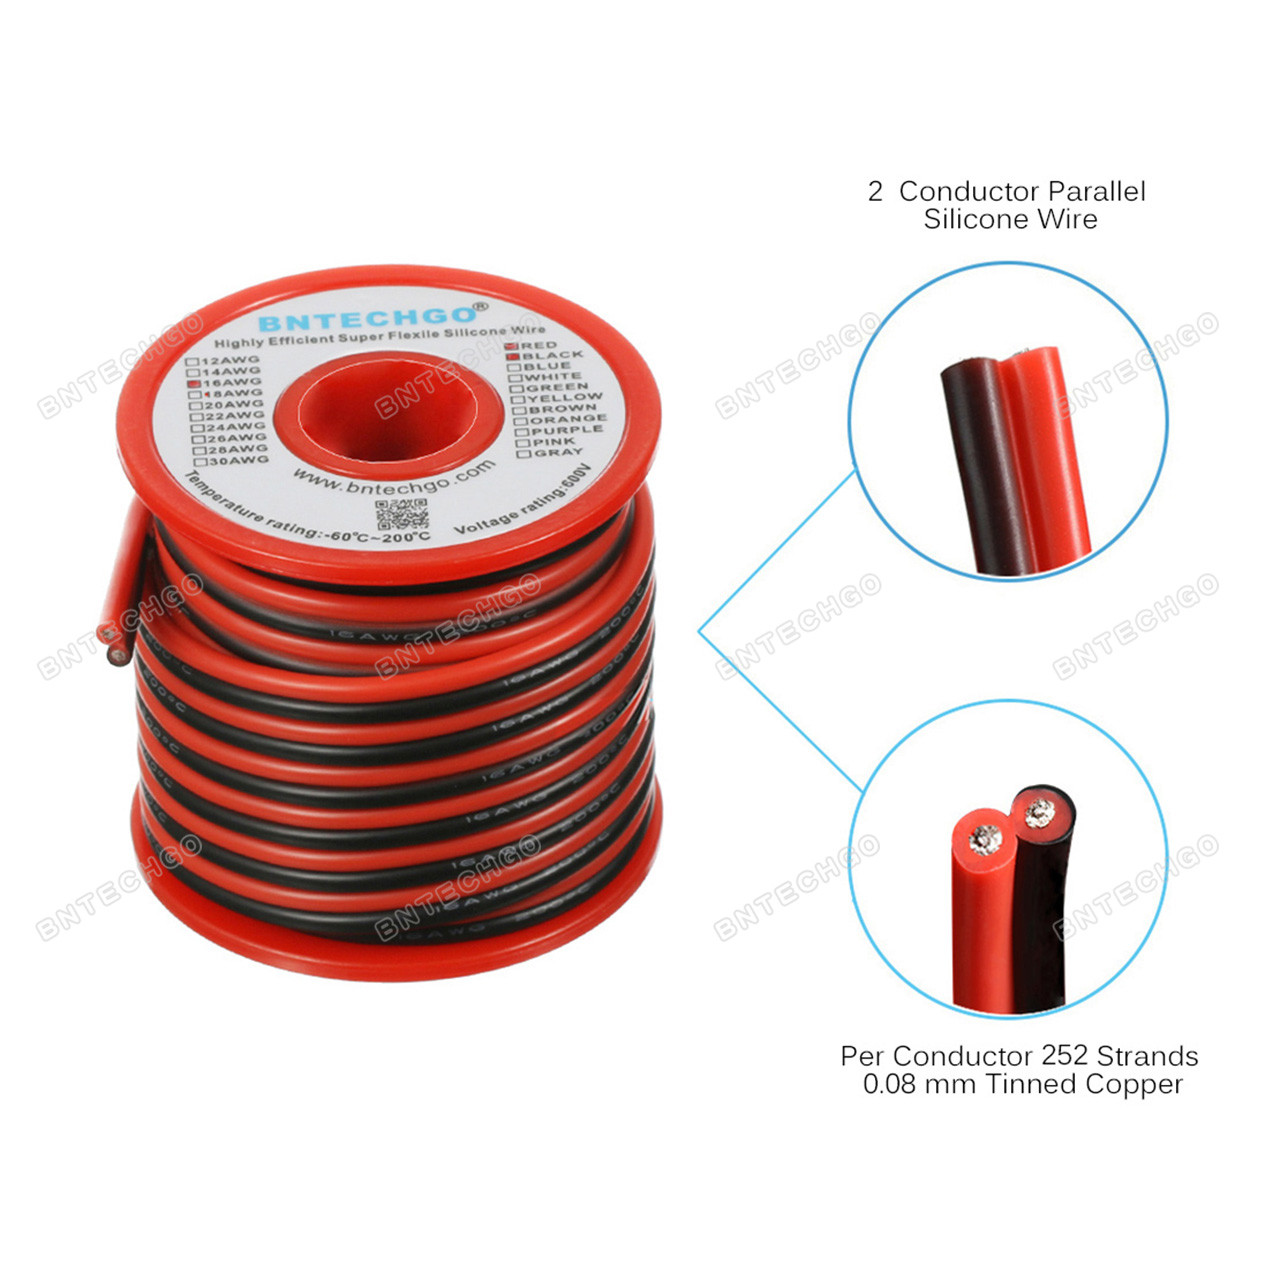 BNTECHGO 16 Gauge Flexible 2 Conductor Parallel Silicone Wire Spool Red  Black High Resistant 200 deg C 600V for Single Color LED Strip Extension  Cable